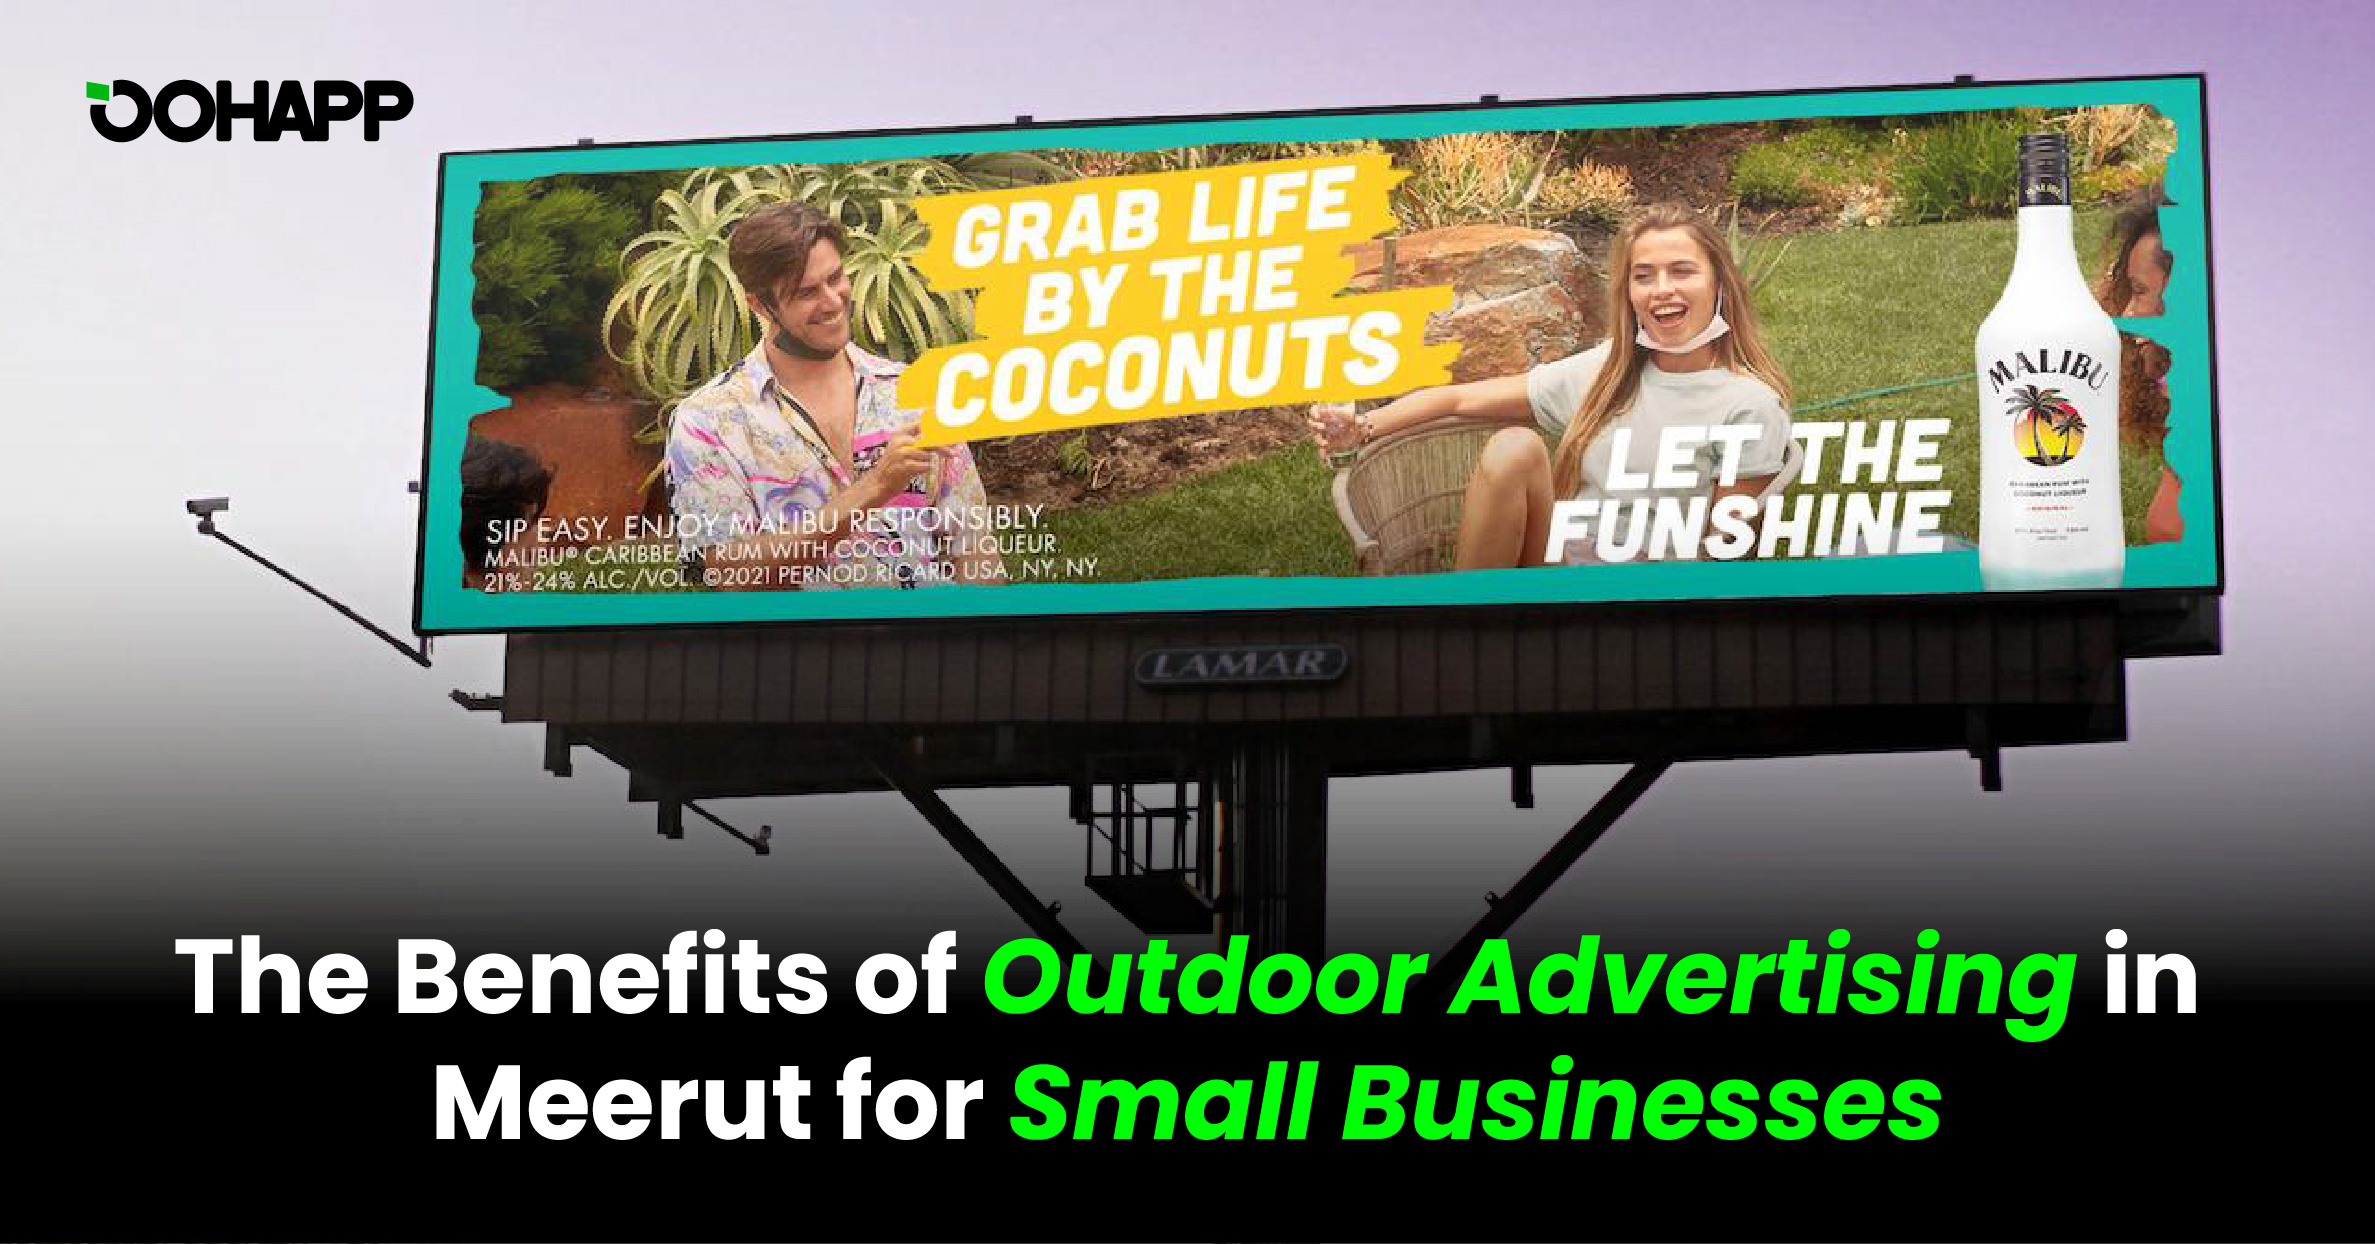 The Benefits of Outdoor Advertising in Meerut for Small Businesses